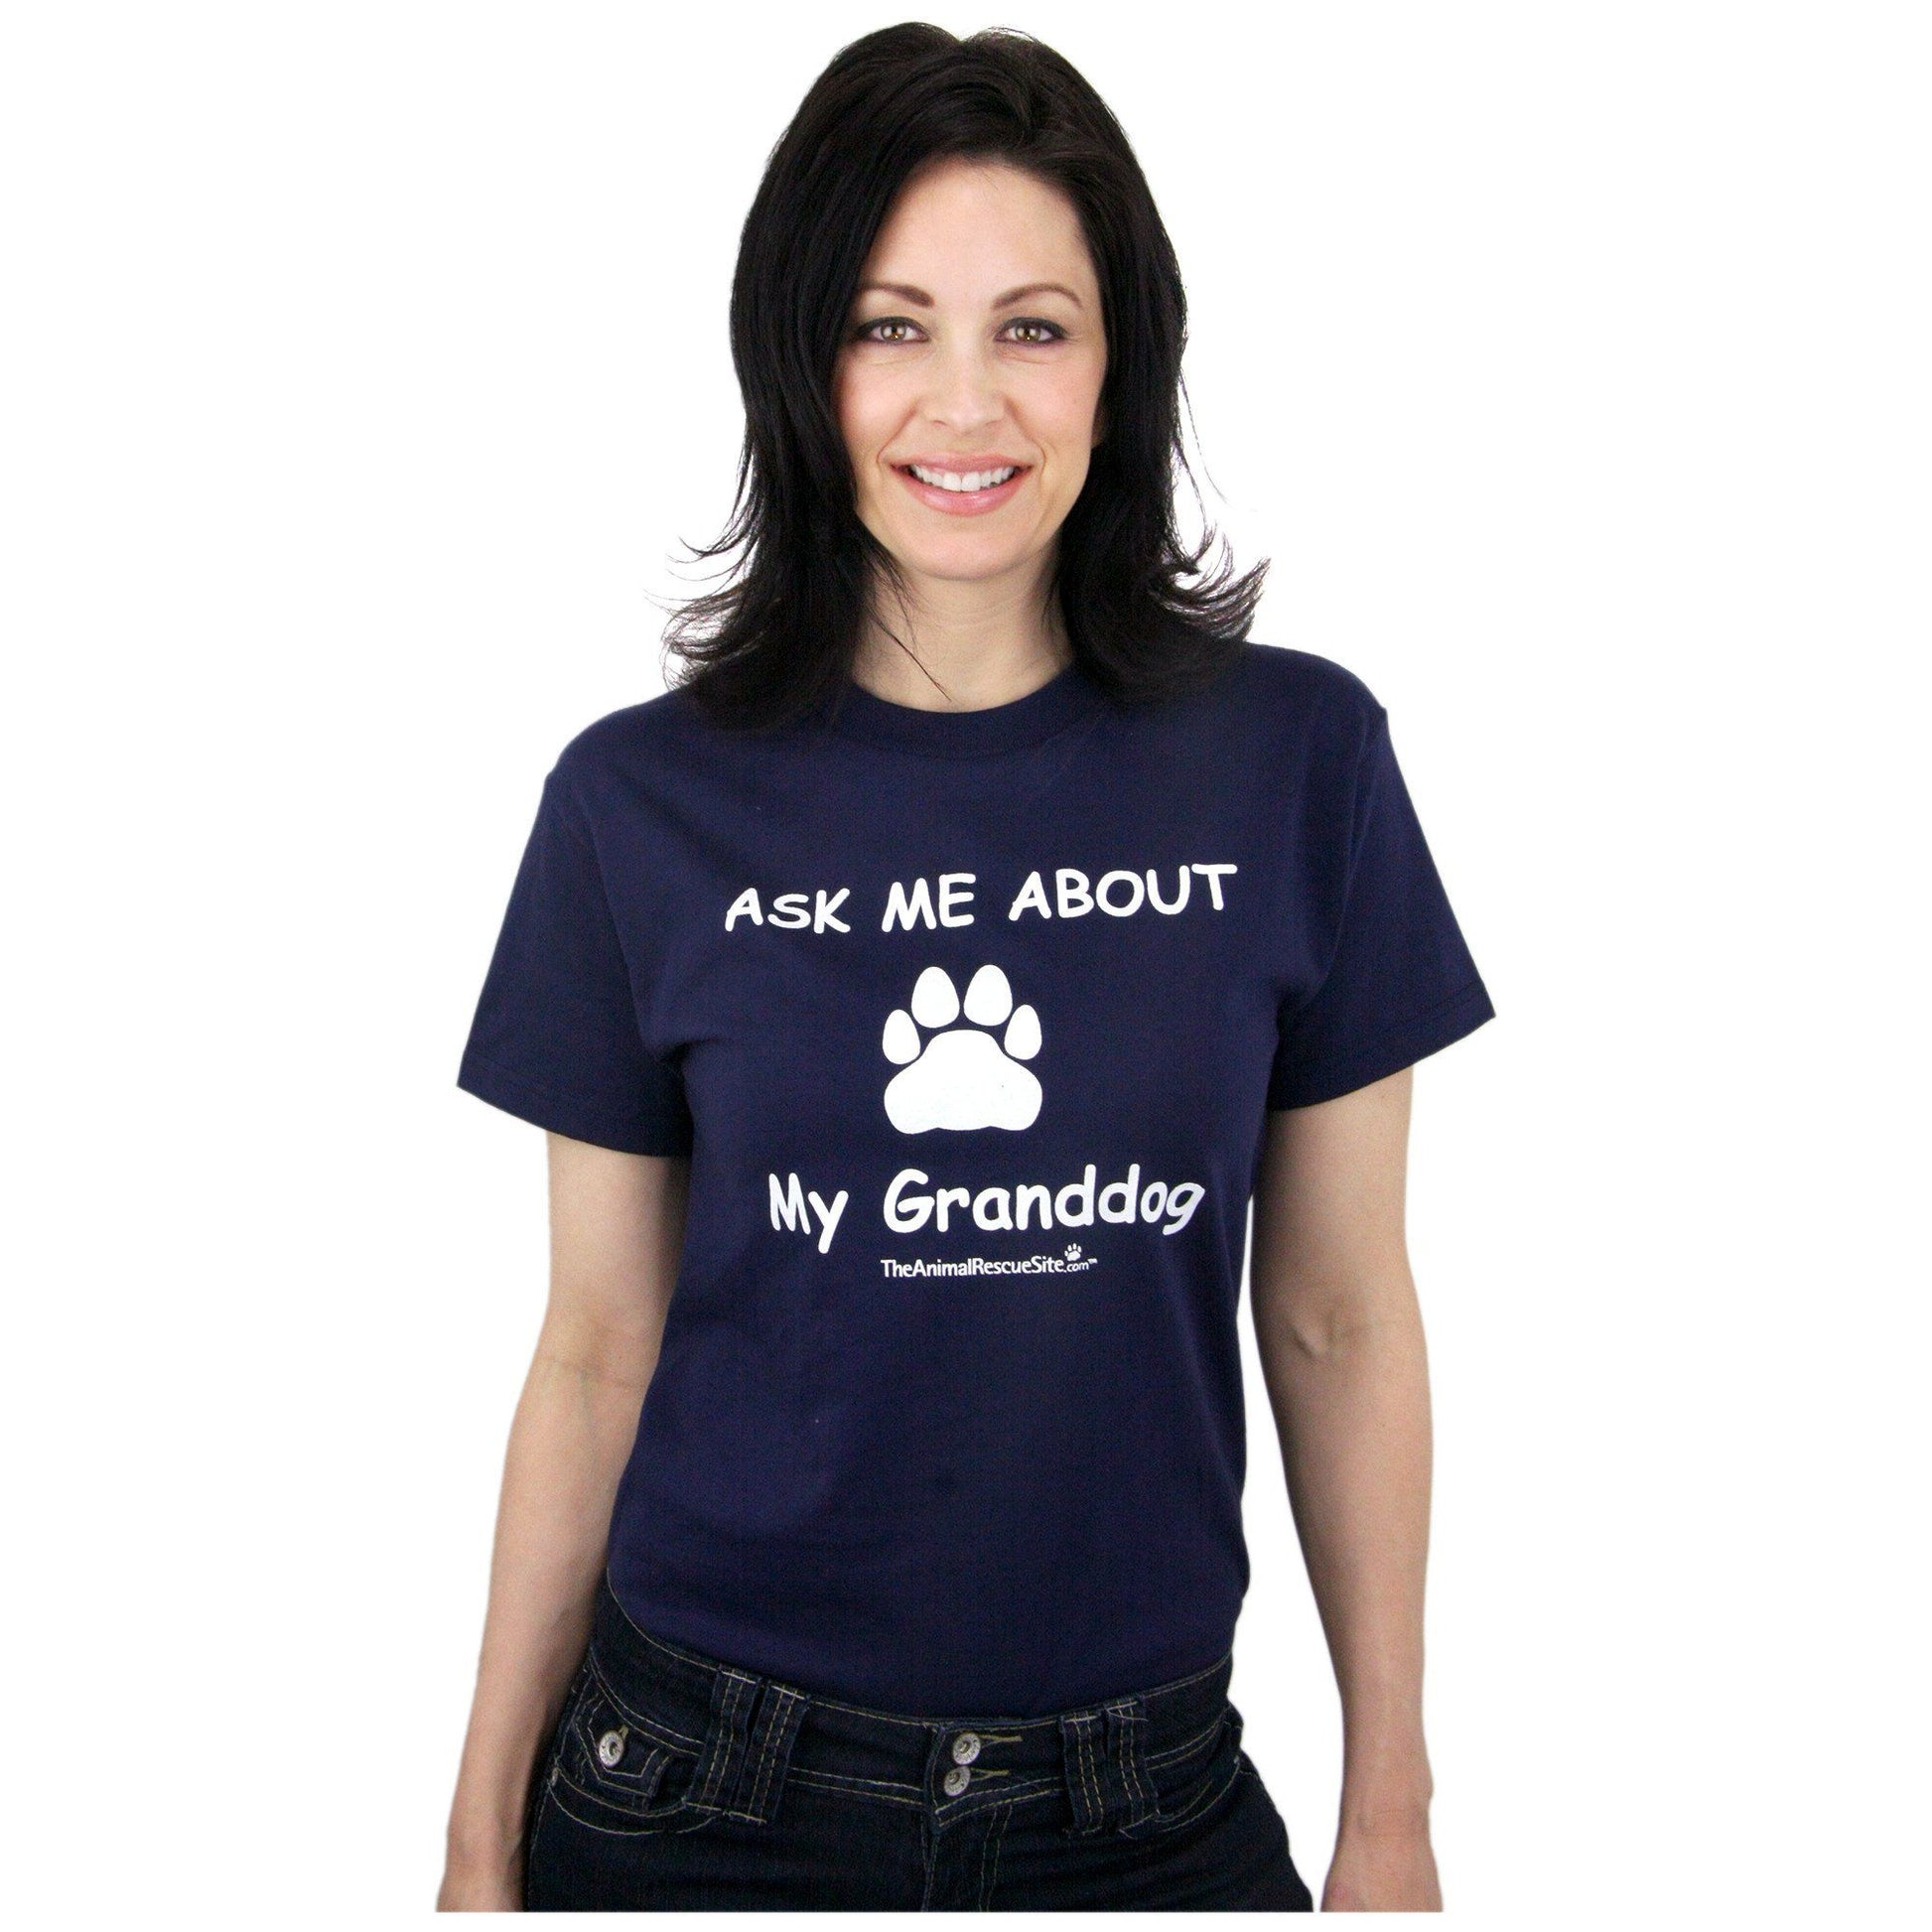 "Ask Me About My Granddog" T-Shirt